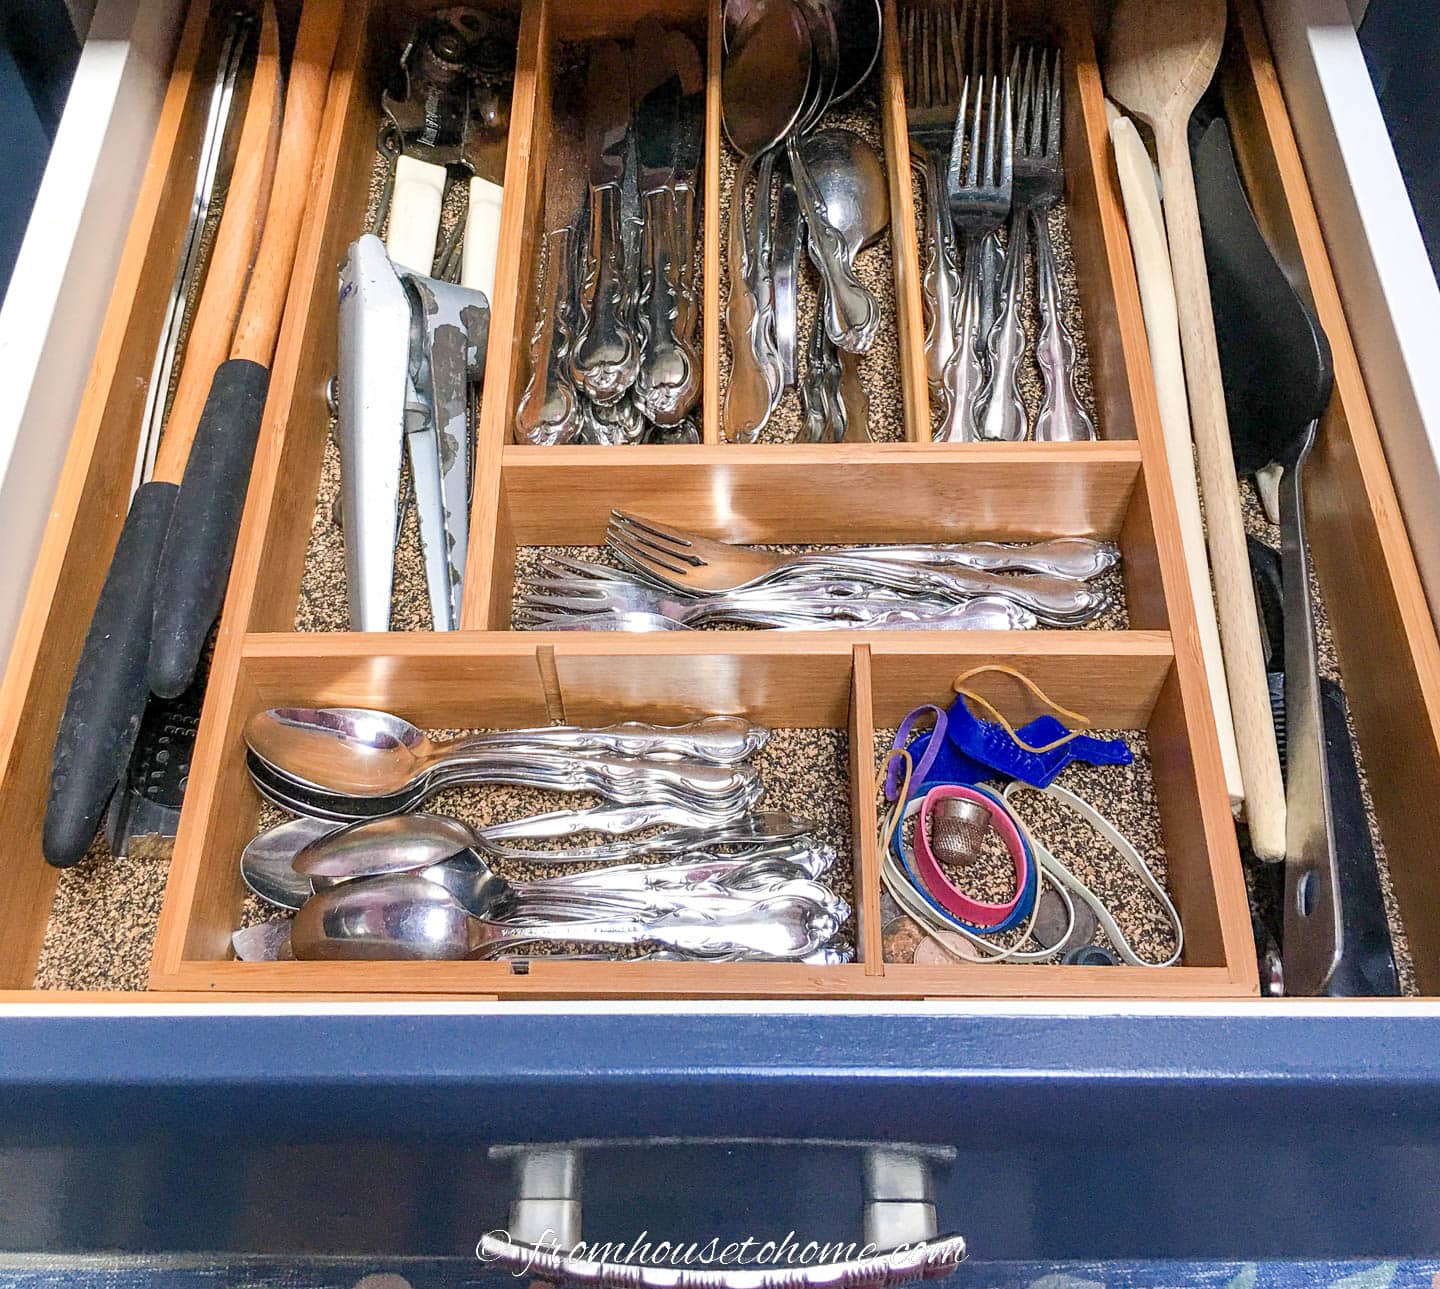 Kitchen drawer with bamboo dividers containing silverware